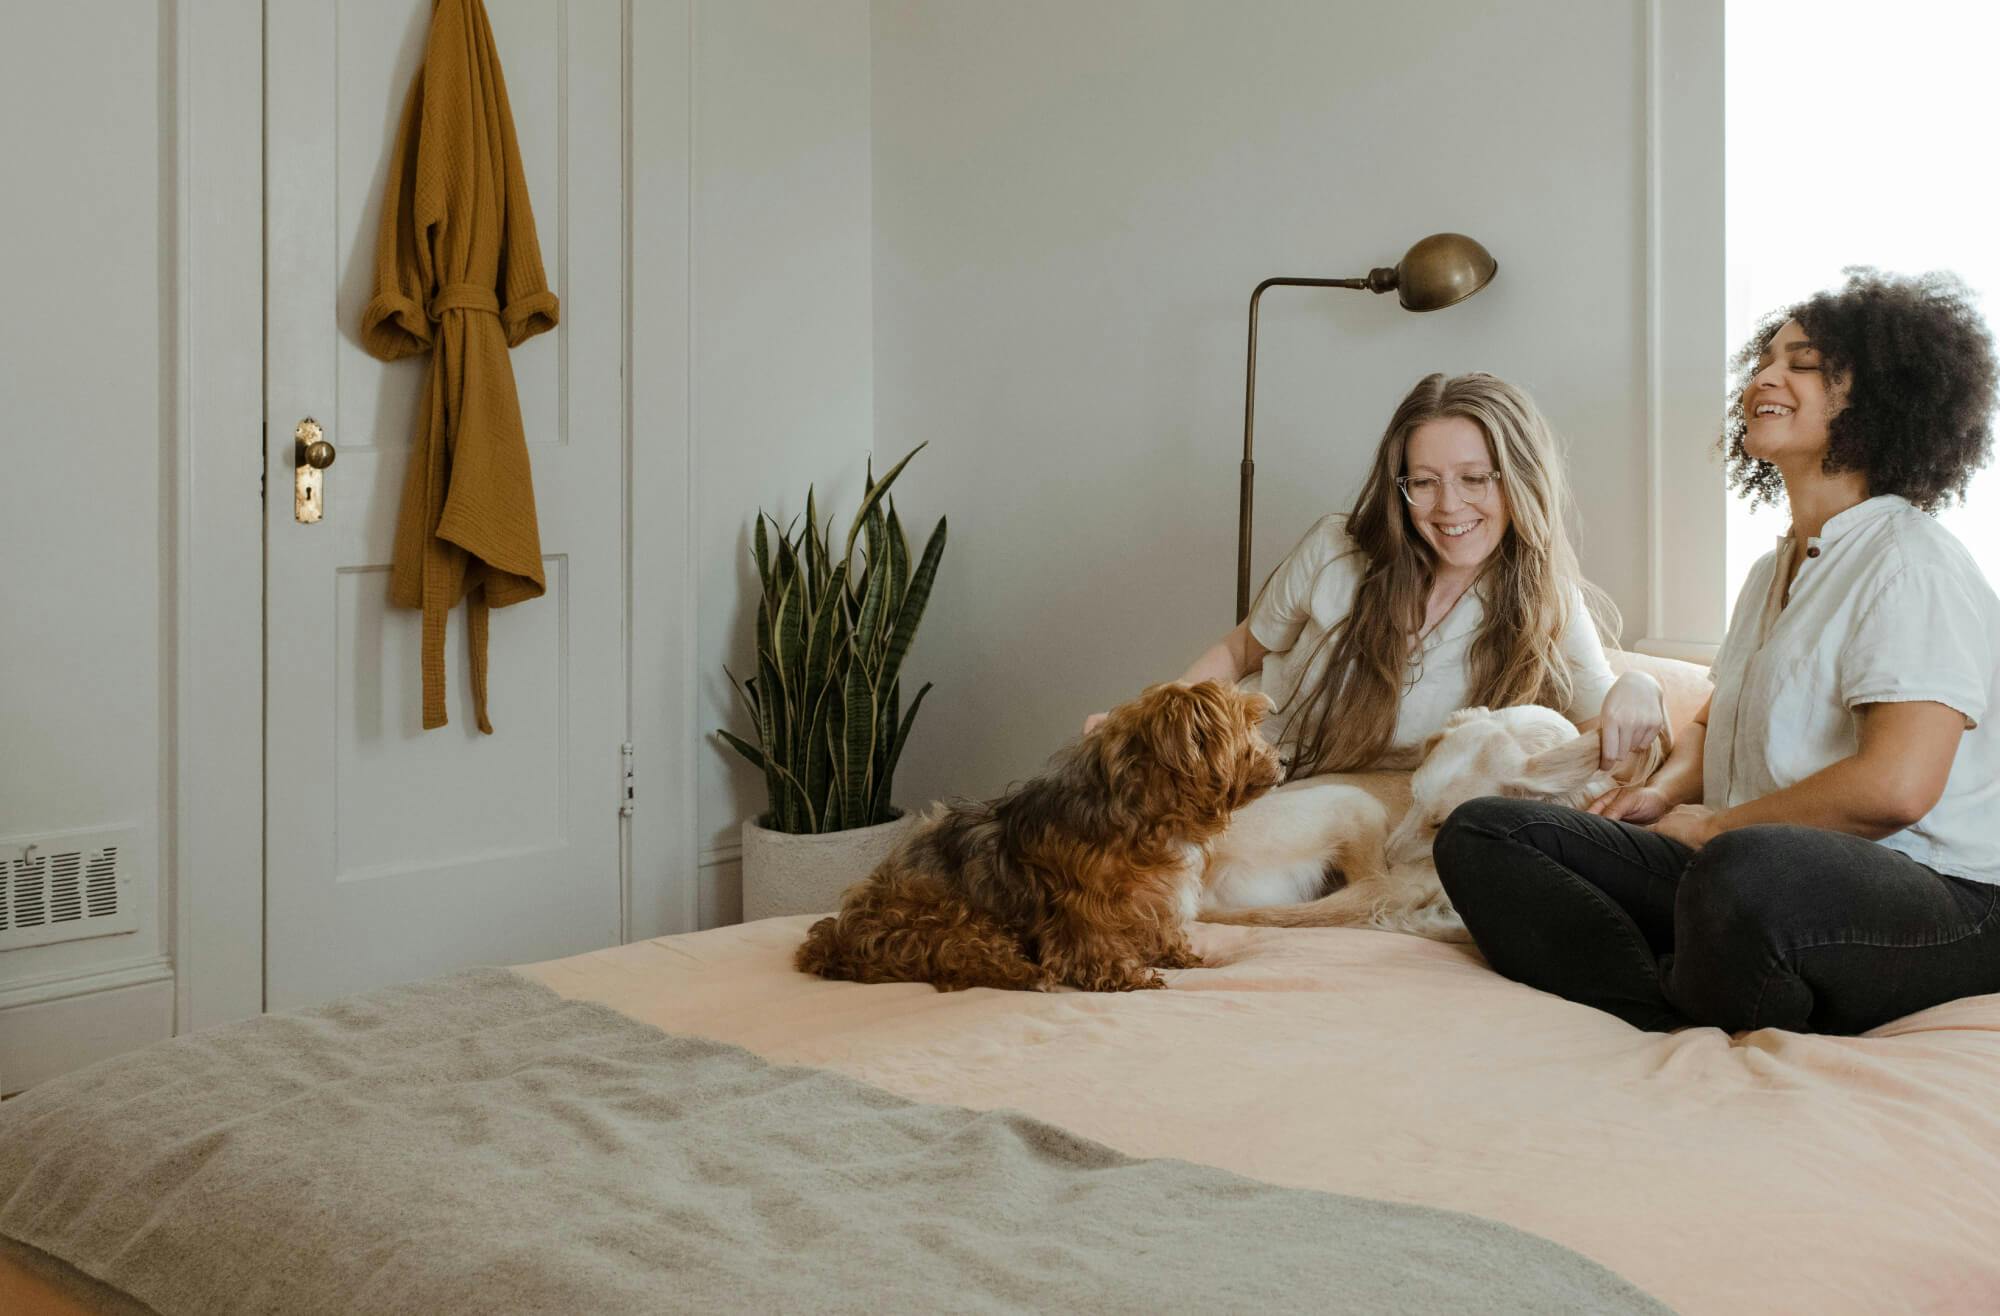 room air, clean and odorless, let’s you live a peaceful coexistence with your animal roommates.